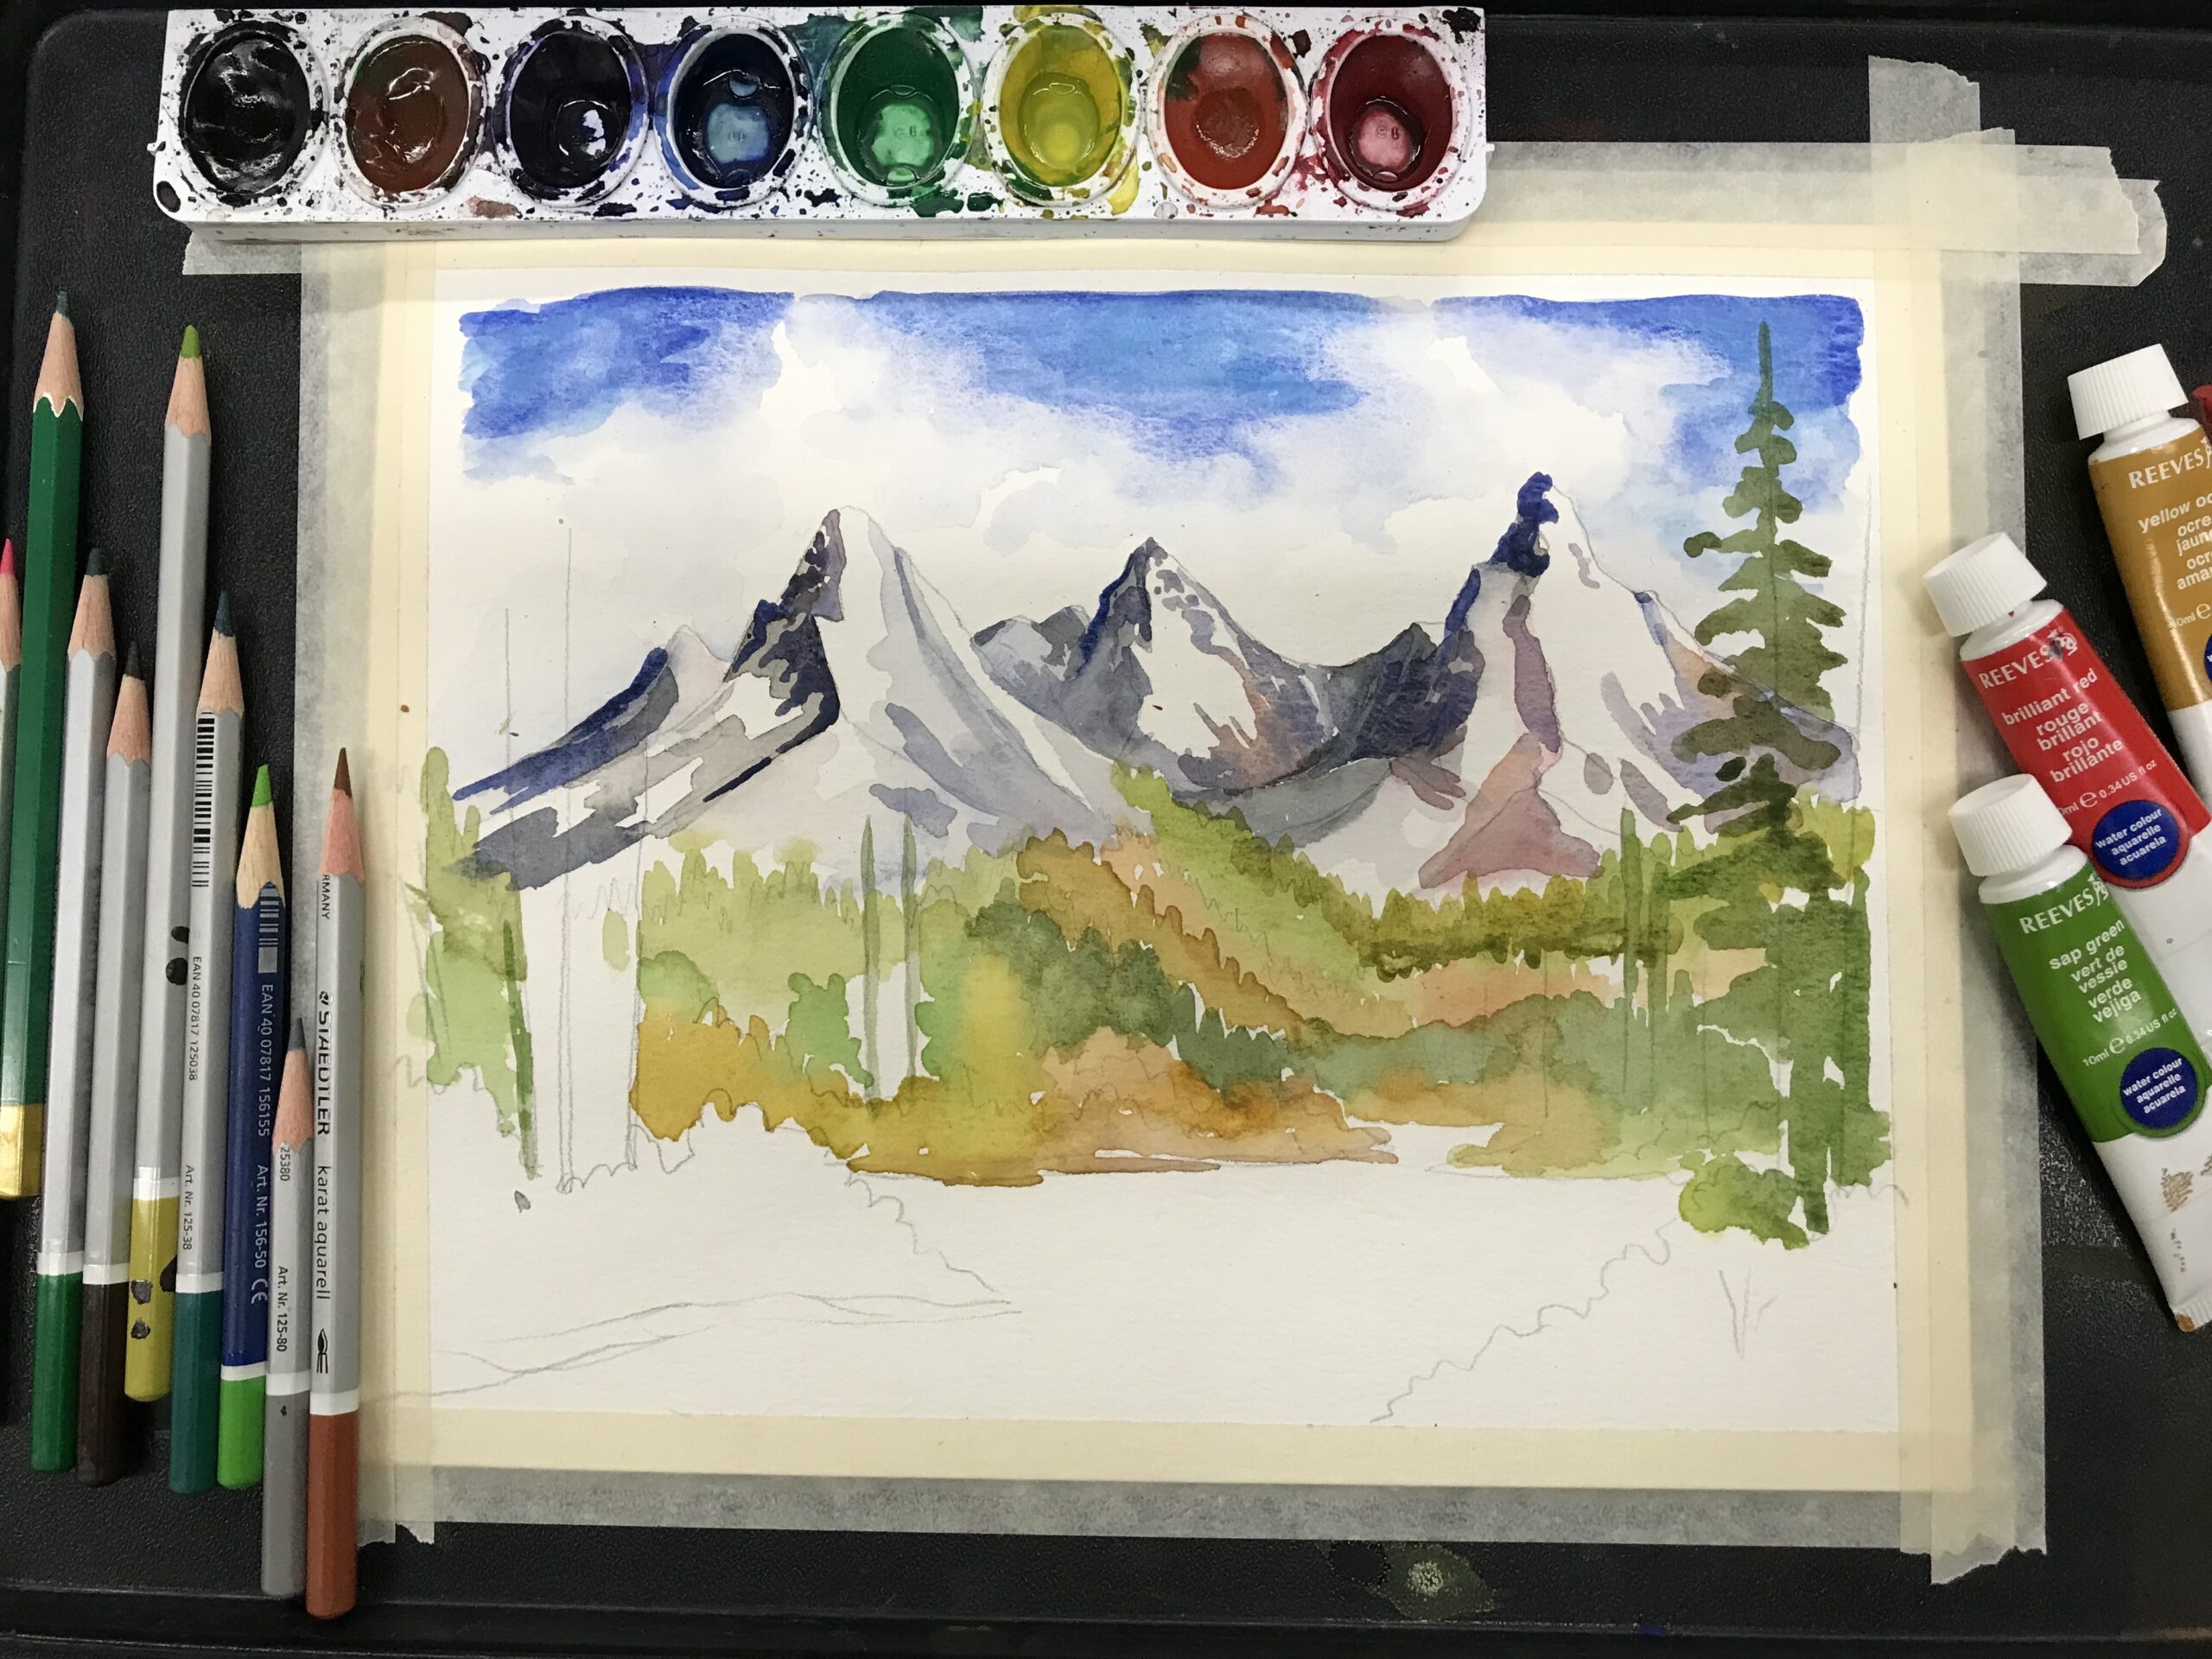 5 Watercolor Pencil Techniques for Beginners (That Pros Use Too)